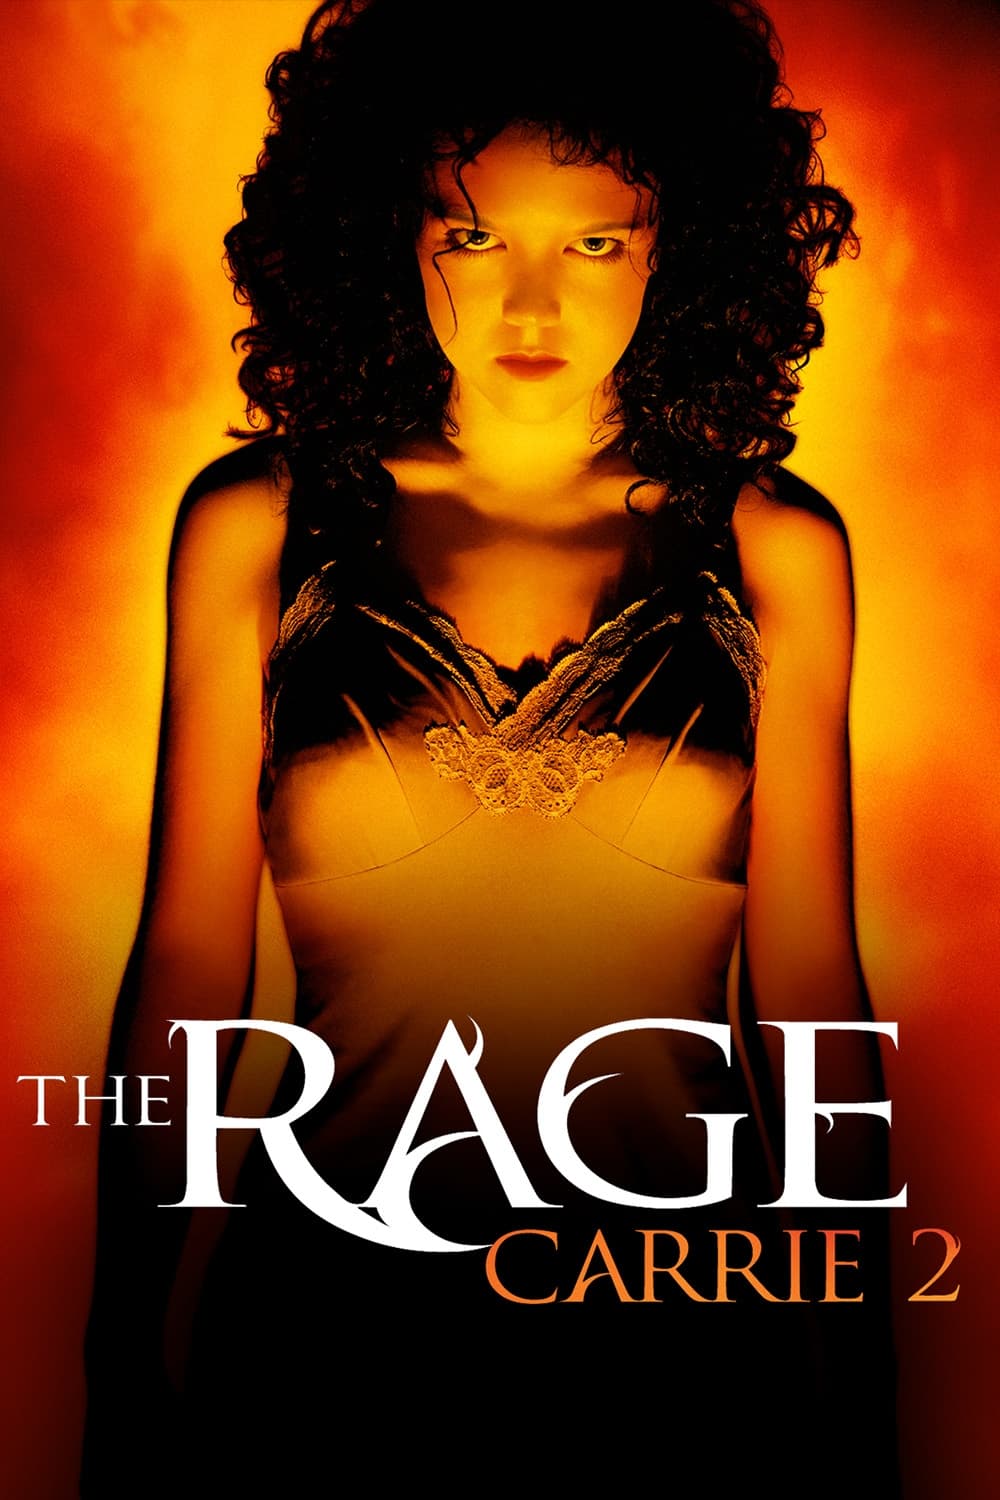 Affiche du film The Rage: Carrie 2 poster